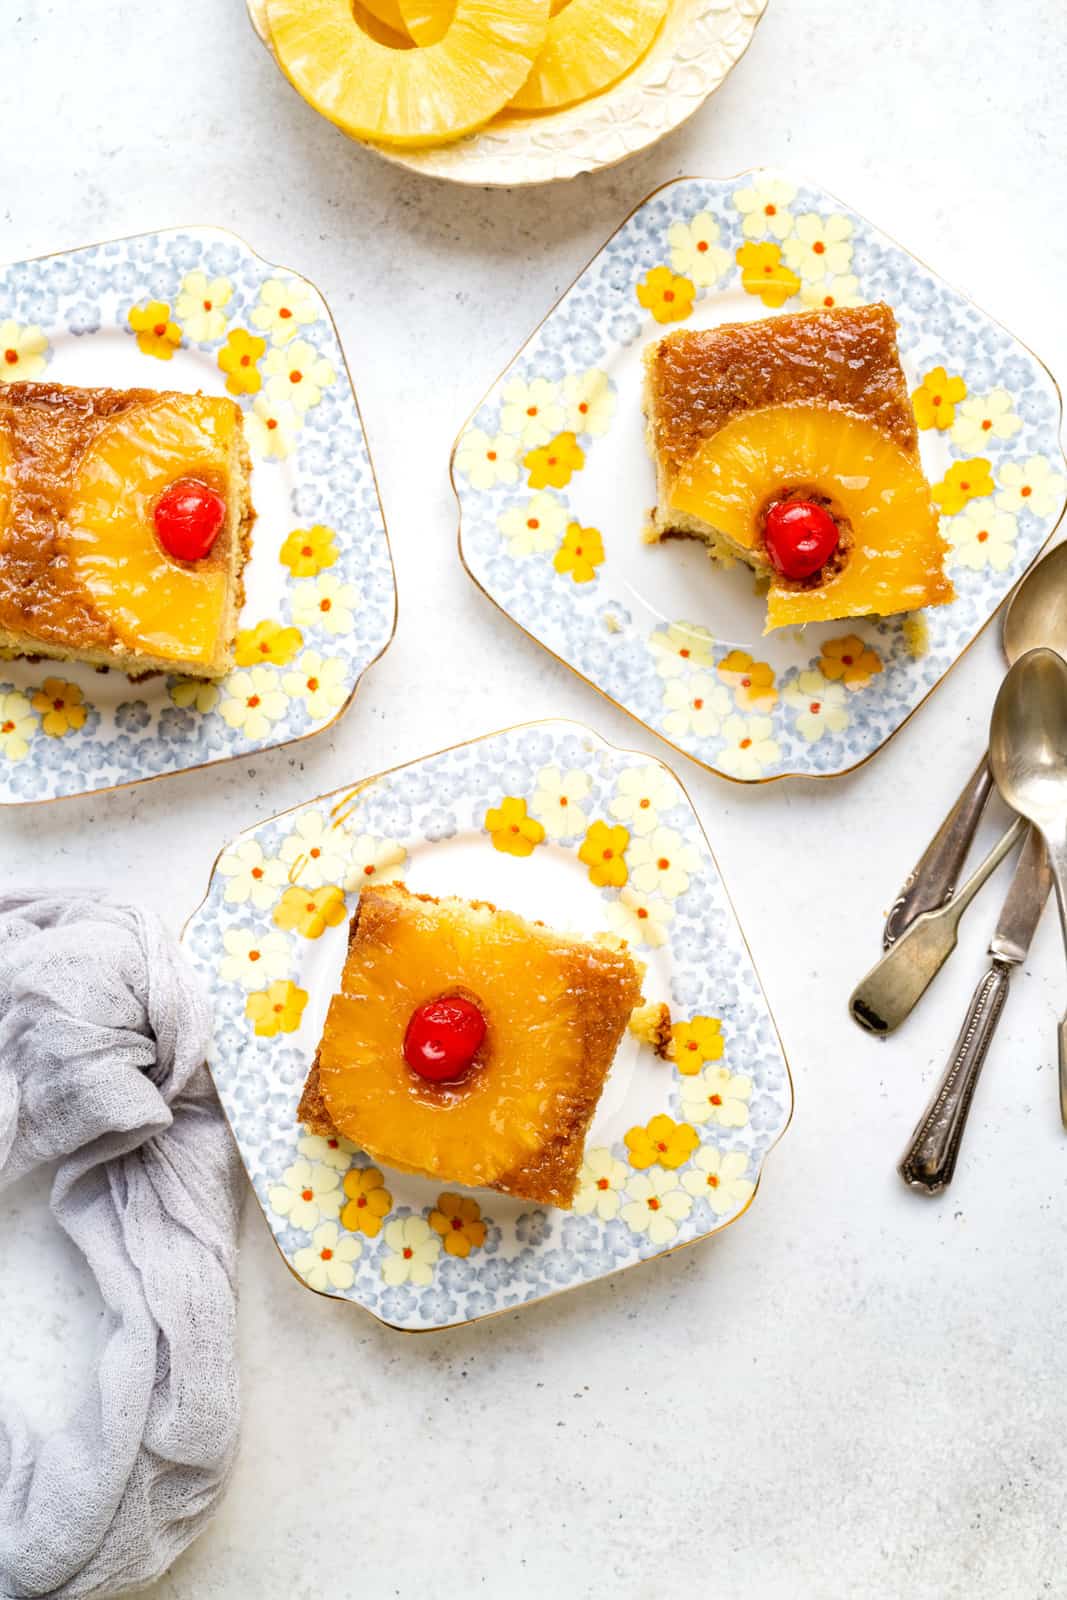 three slices over pineapple cake on floral vintage plates shown overhead